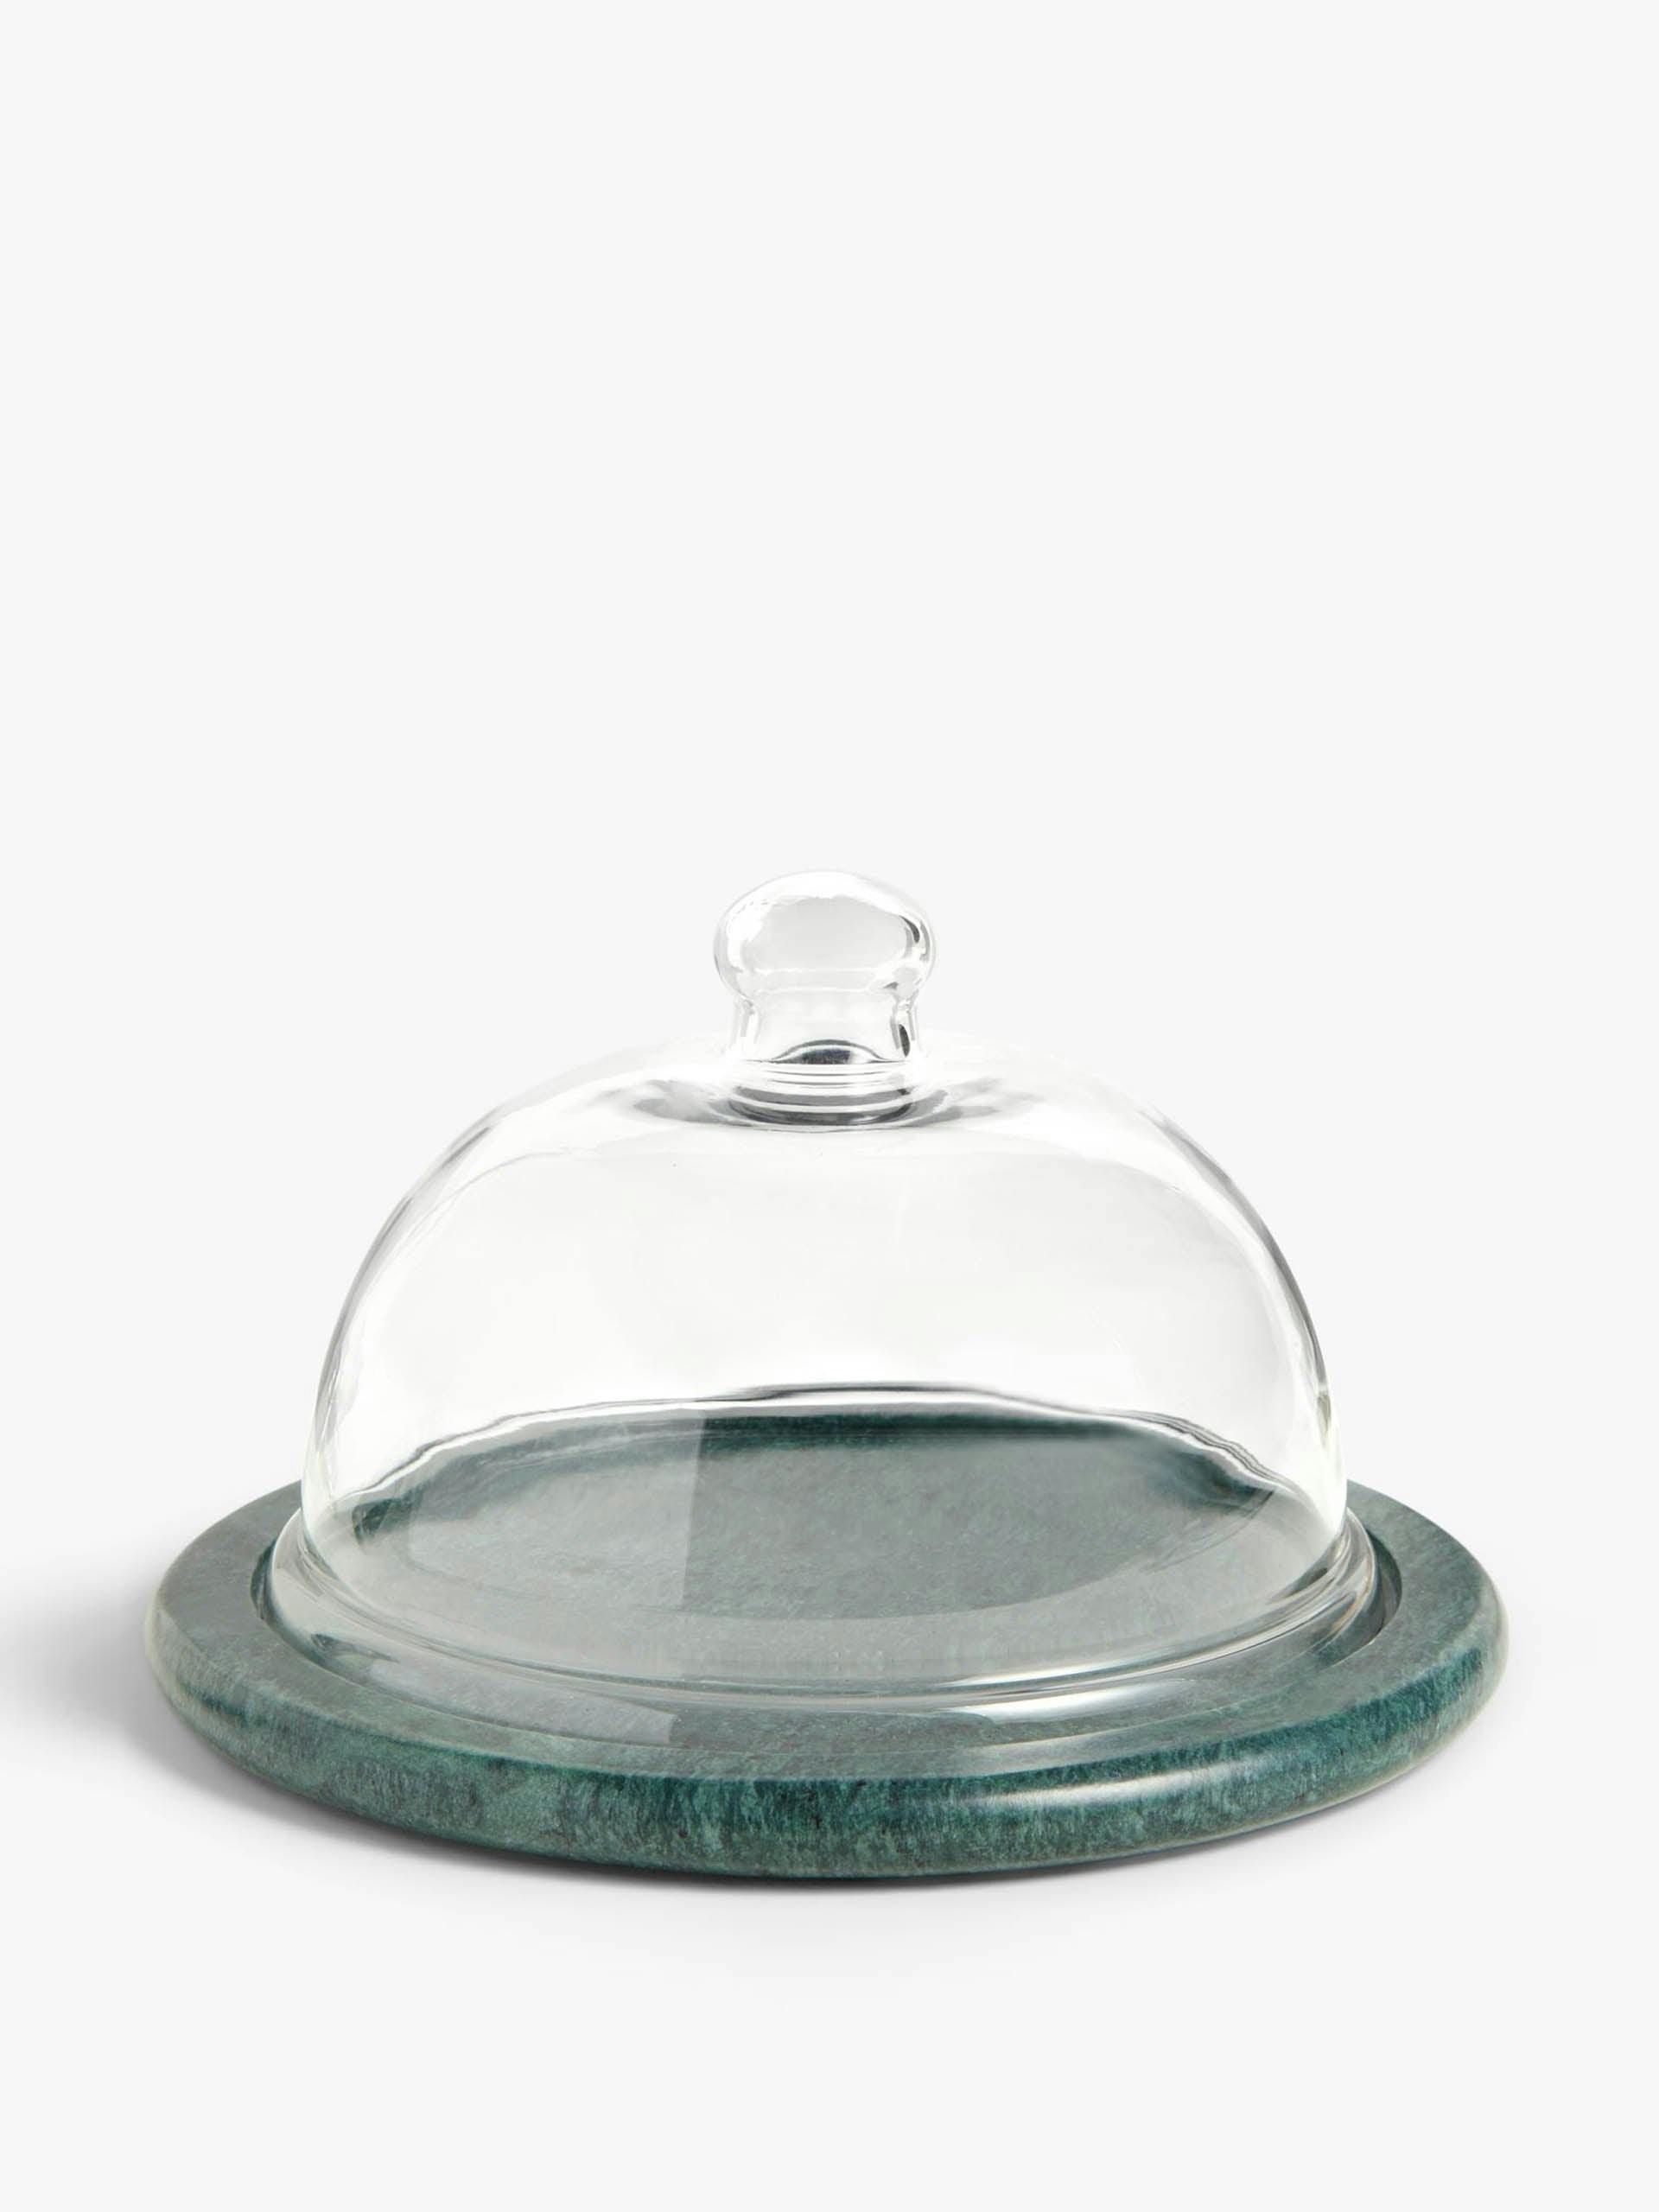 Green marble & glass cheese dome